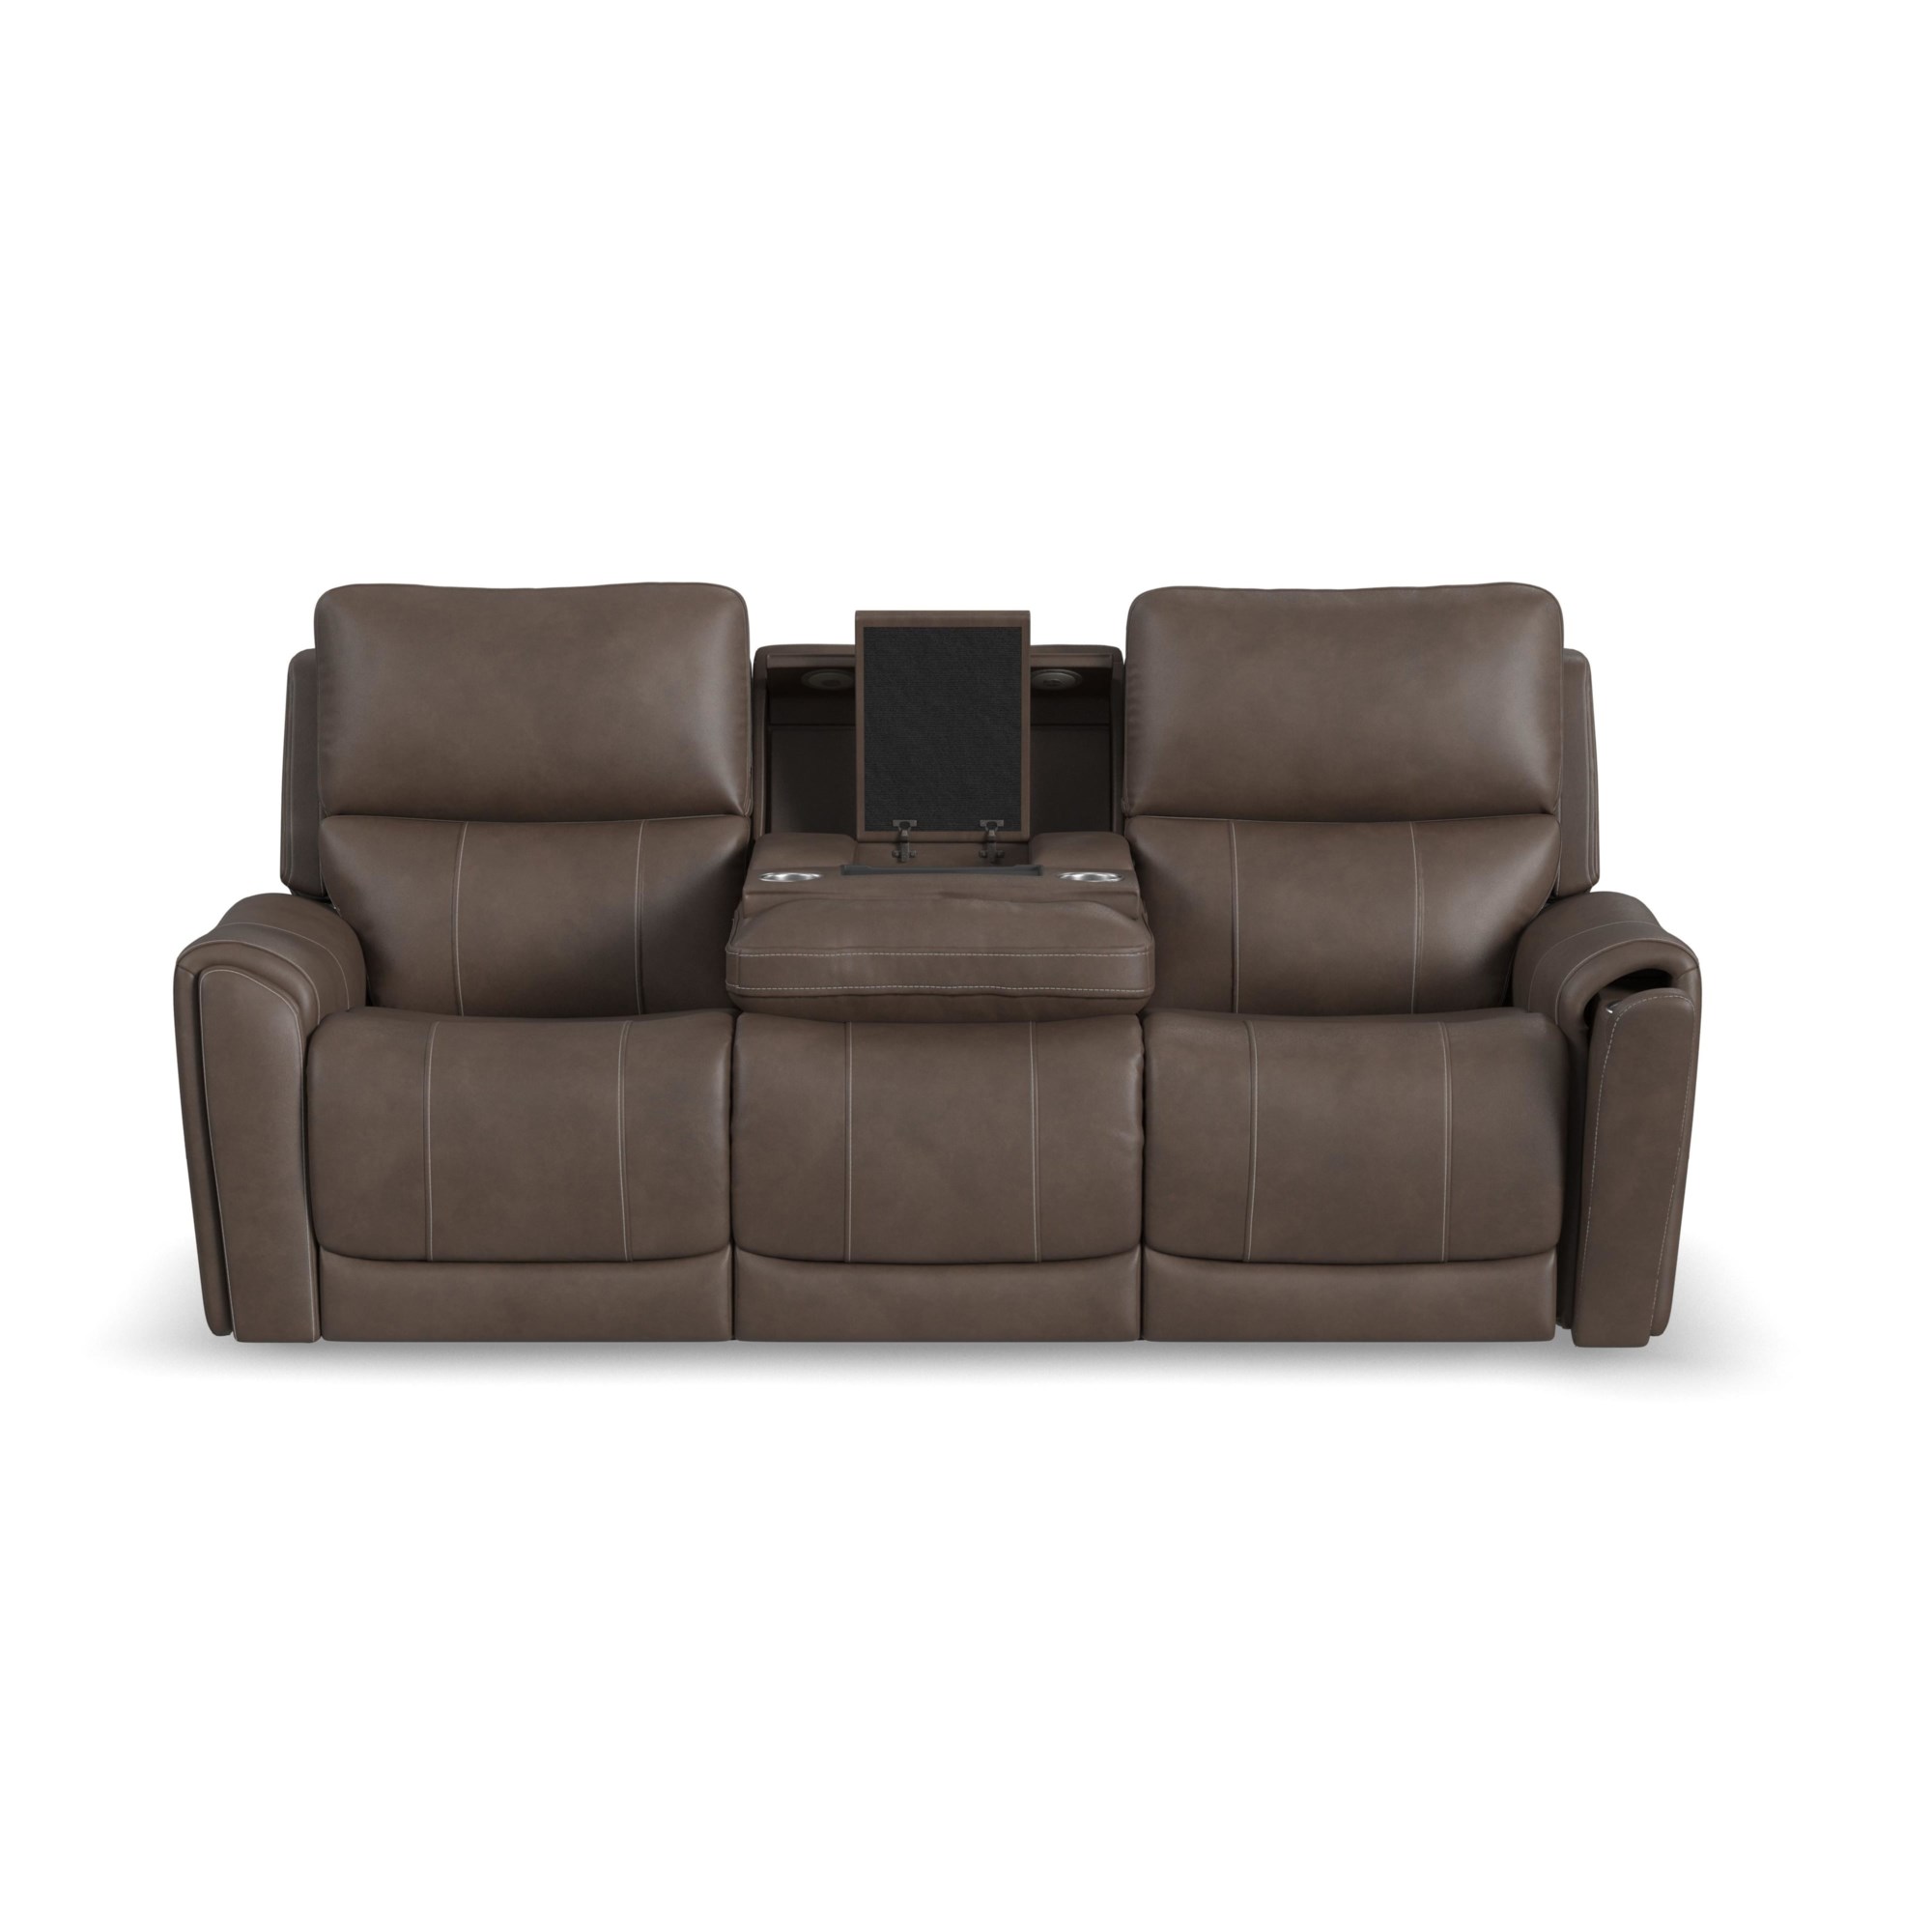 Flexsteel Carson 7936-31 422-80 Customizable Sofa with Rolled Arms, Mueller Furniture